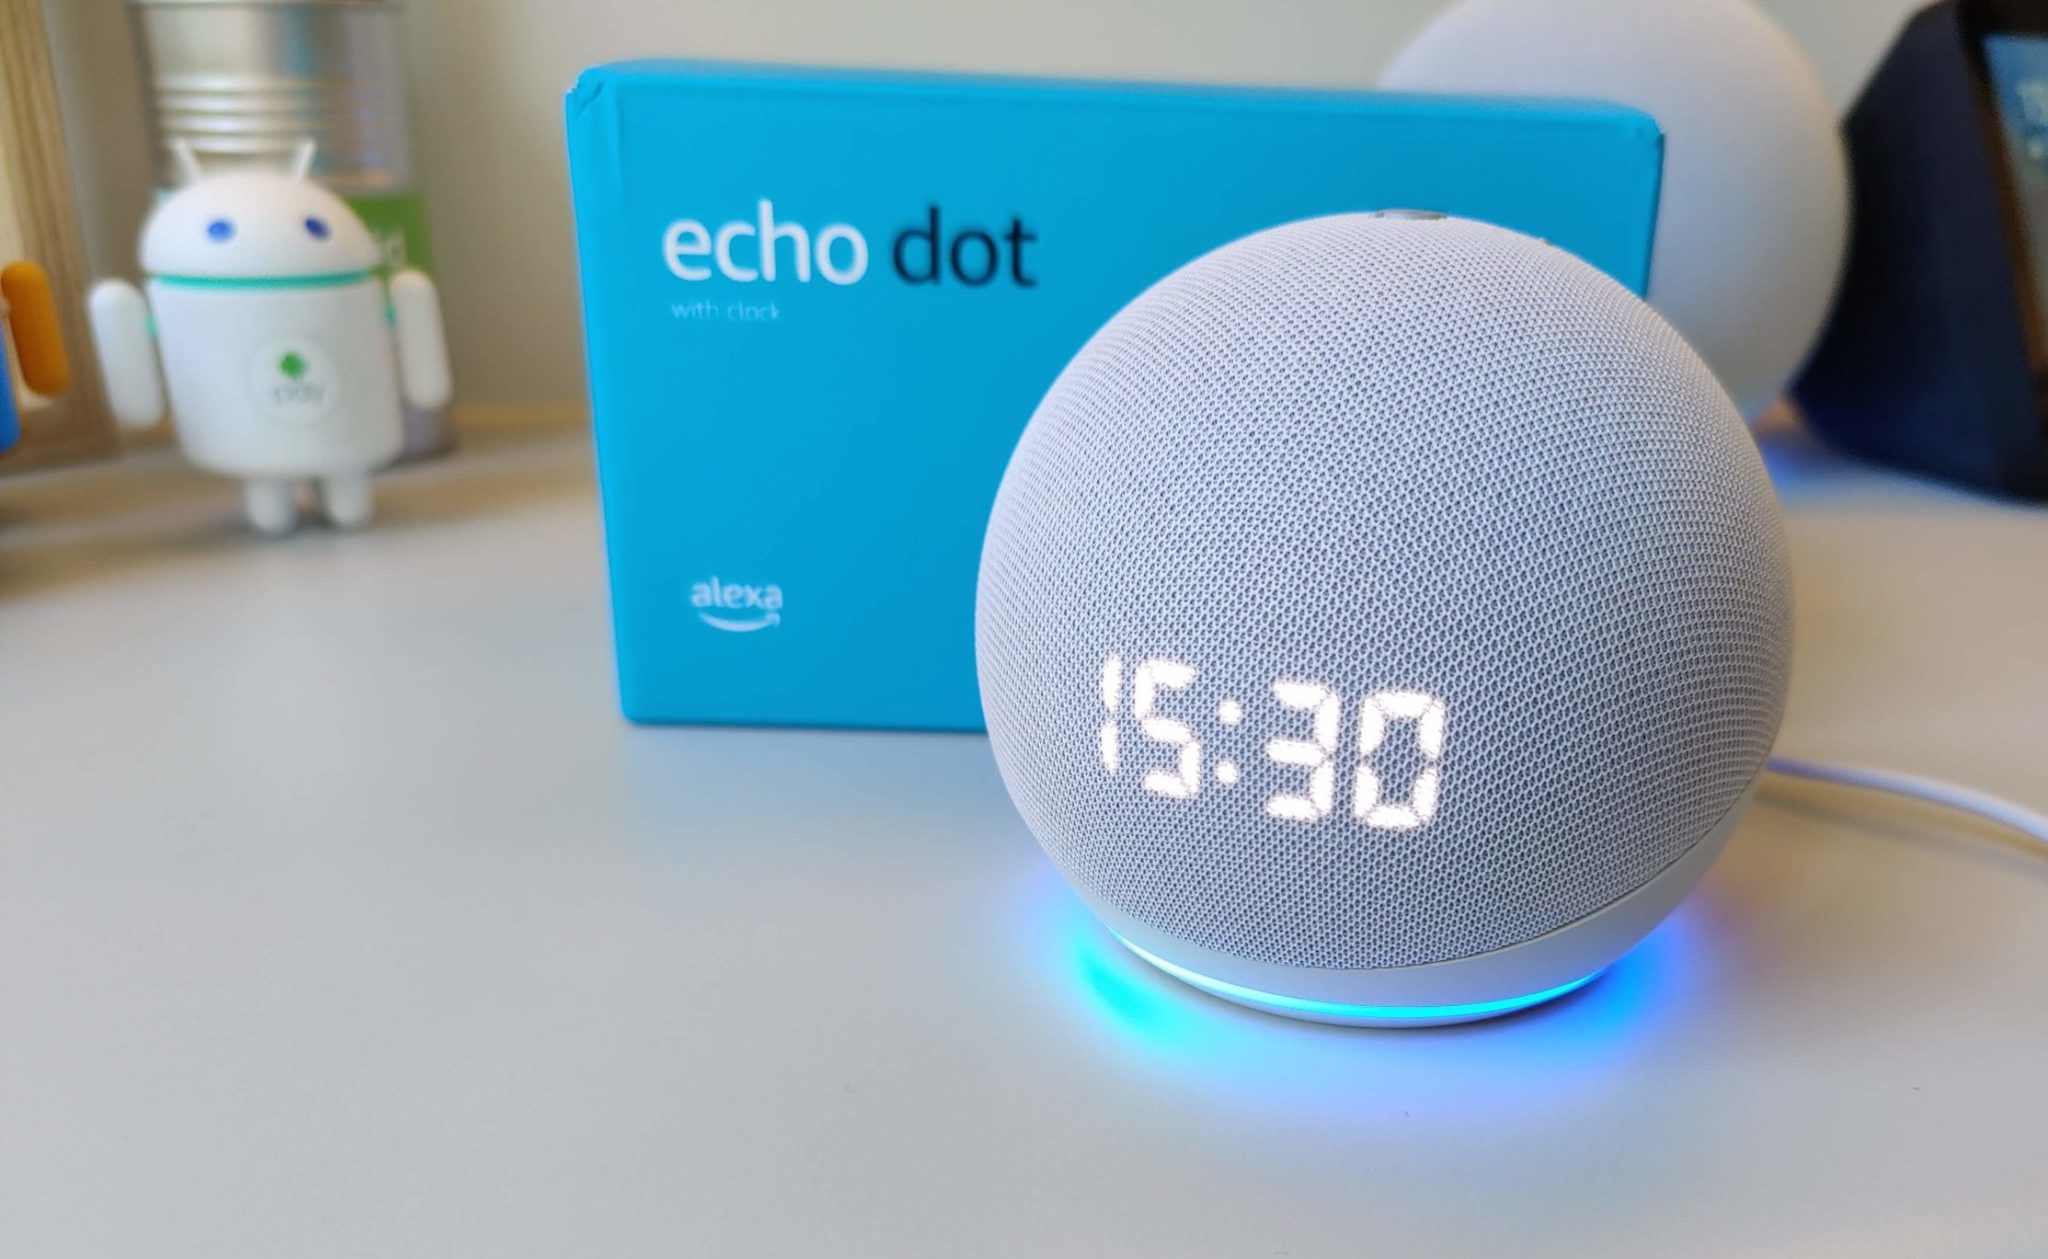 download the last version for windows Echo Storm